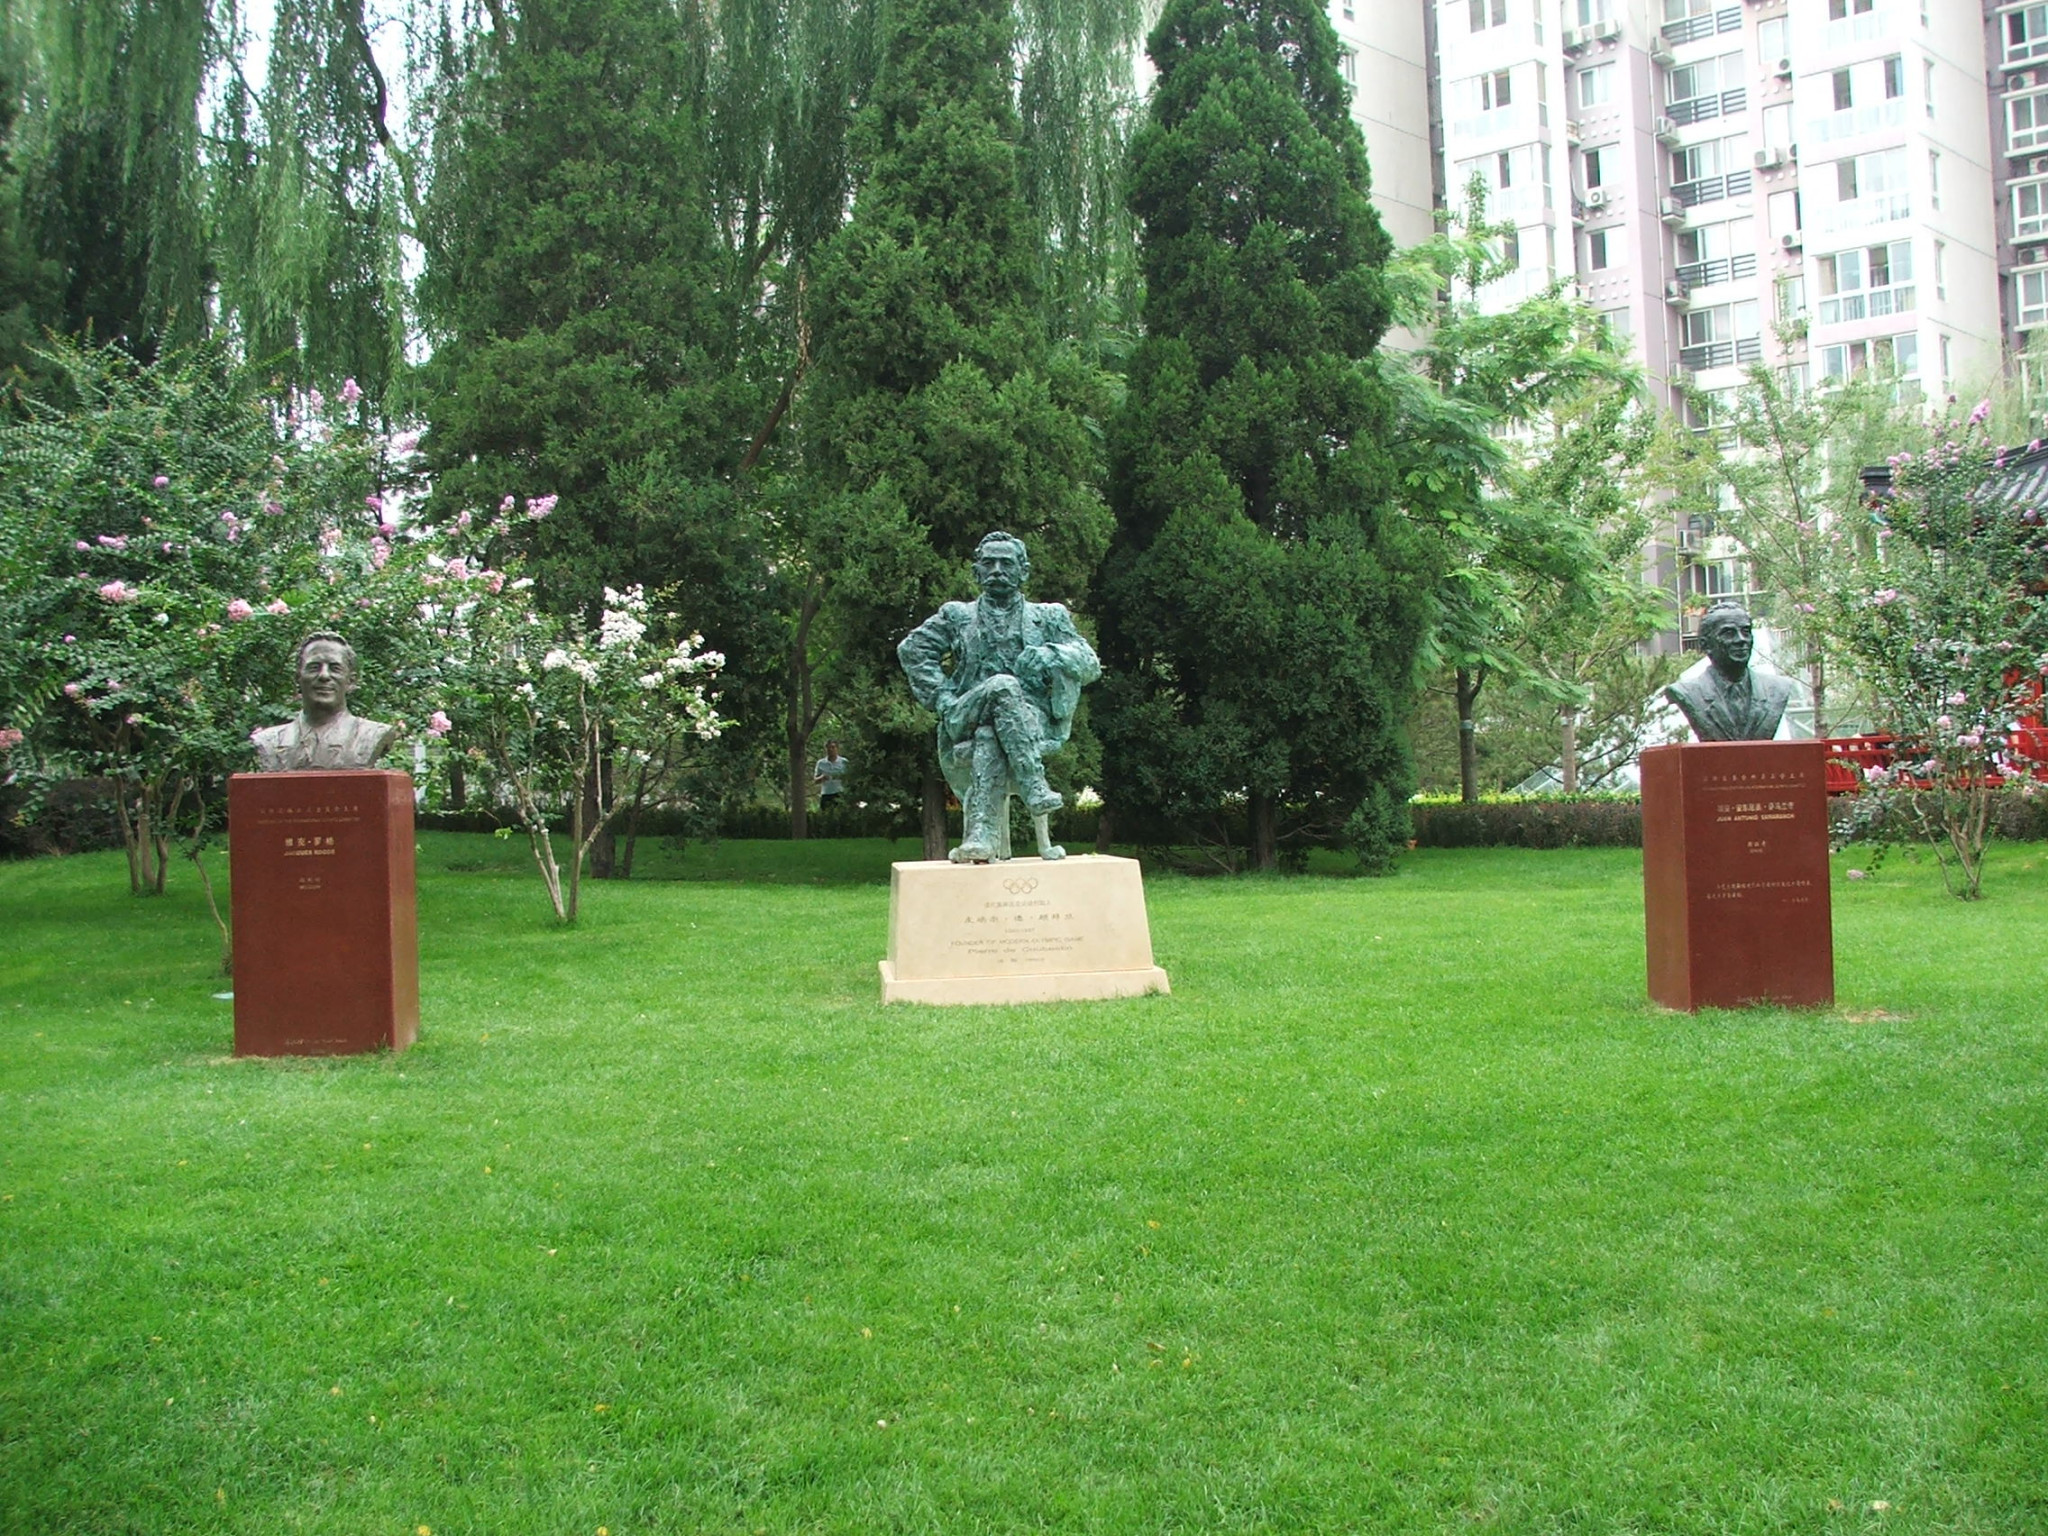 Statues of three former IOC Presidents in Beijing - from left Jacques Rogge, Pierre de Coubertin and Juan Antonio Samaranch ©Philip Barker